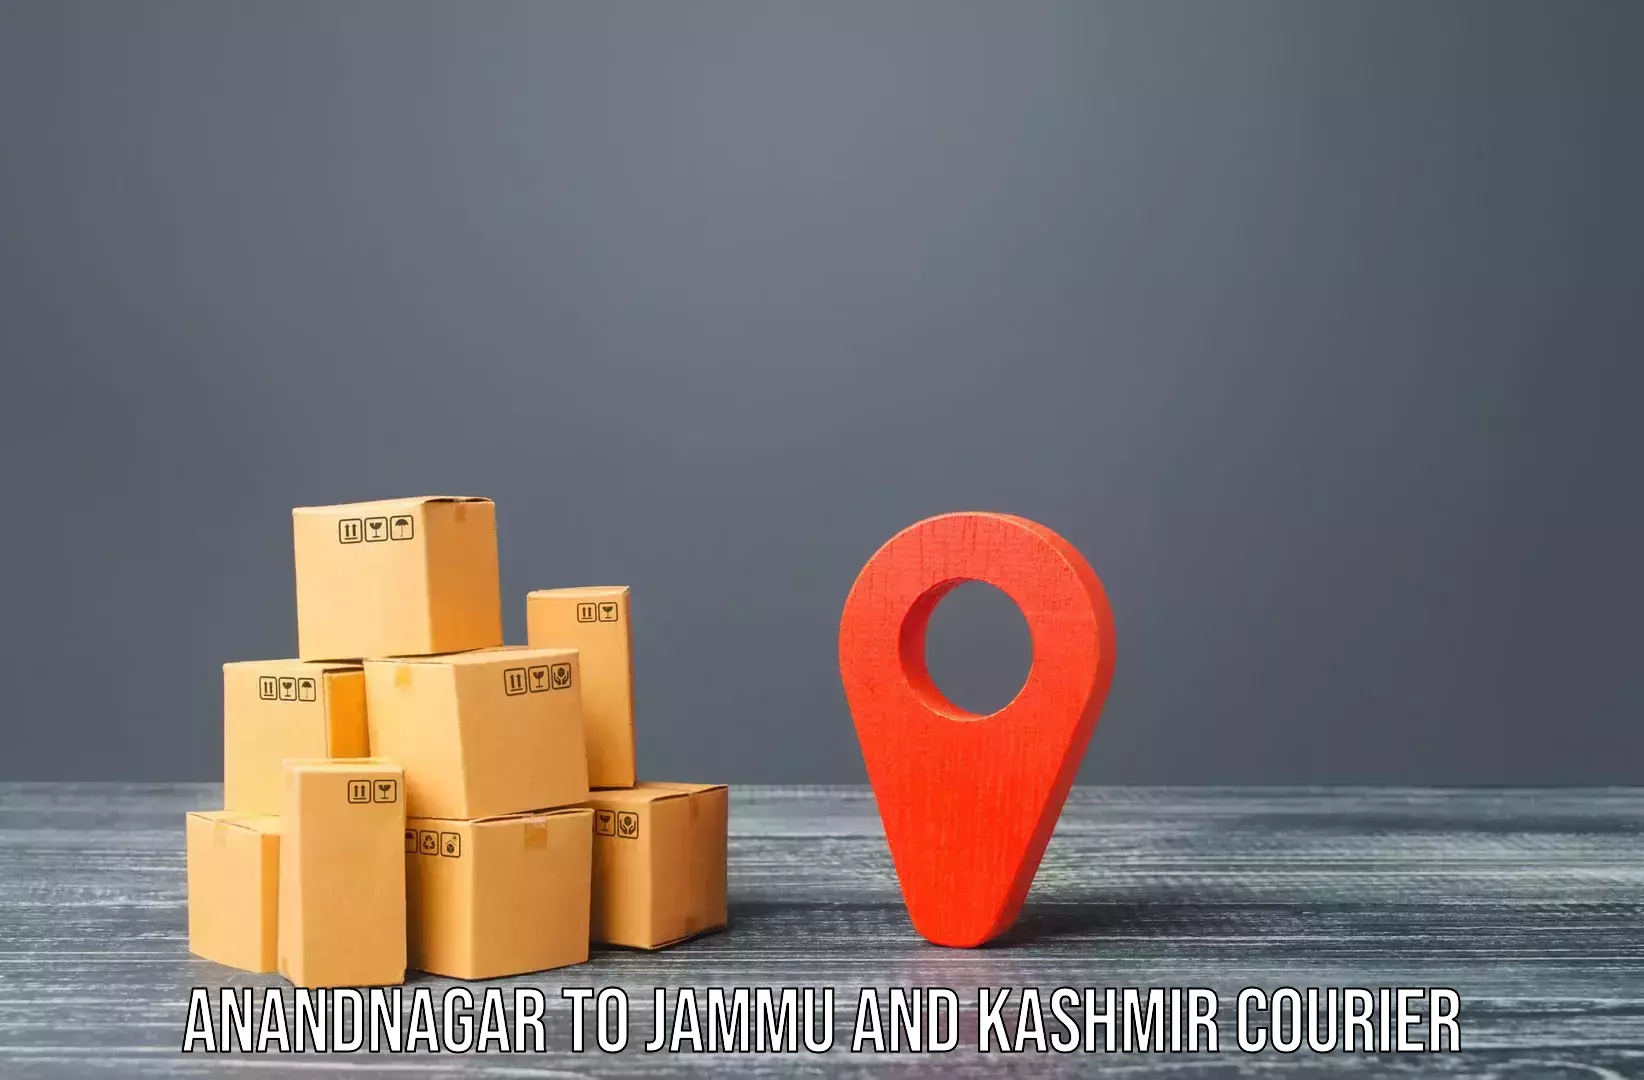 Trusted relocation experts Anandnagar to Ramban